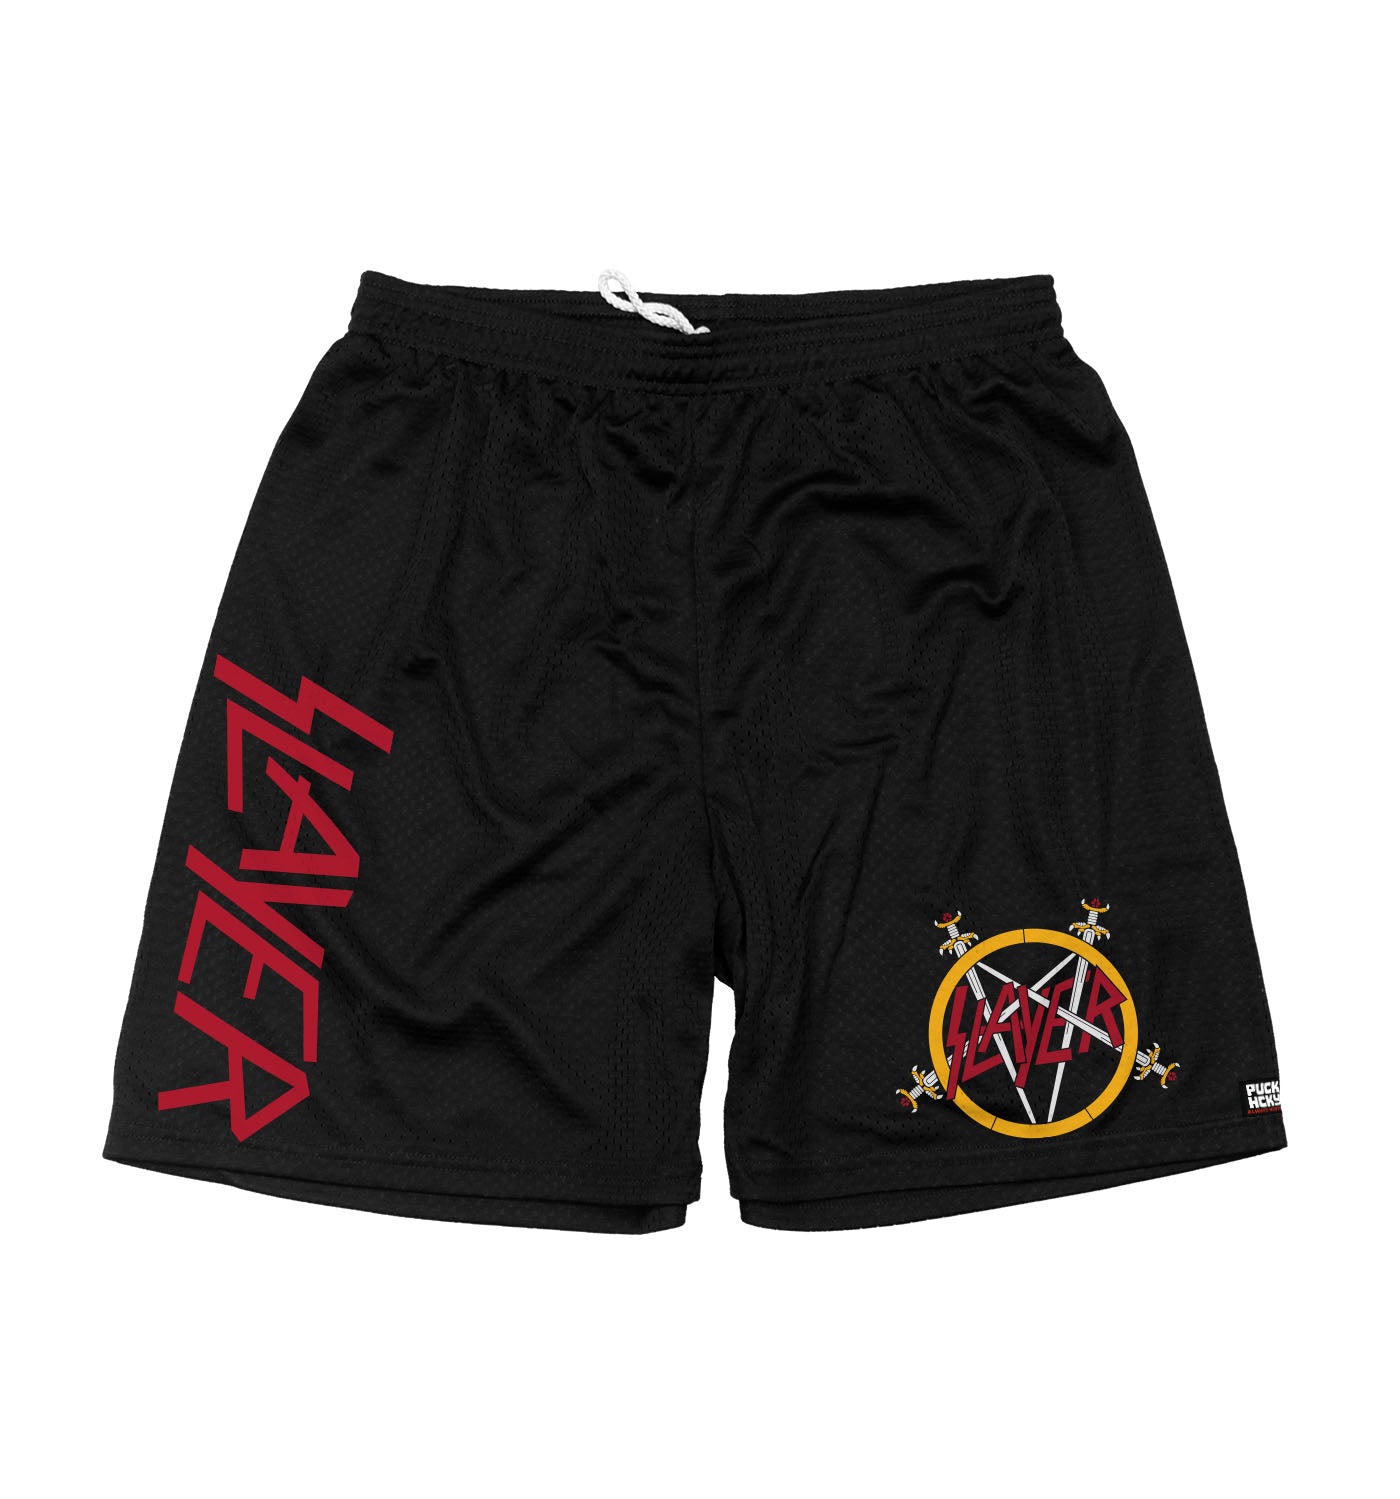 SLAYER 'REIGN IN BLOOD' mesh hockey shorts in black front view